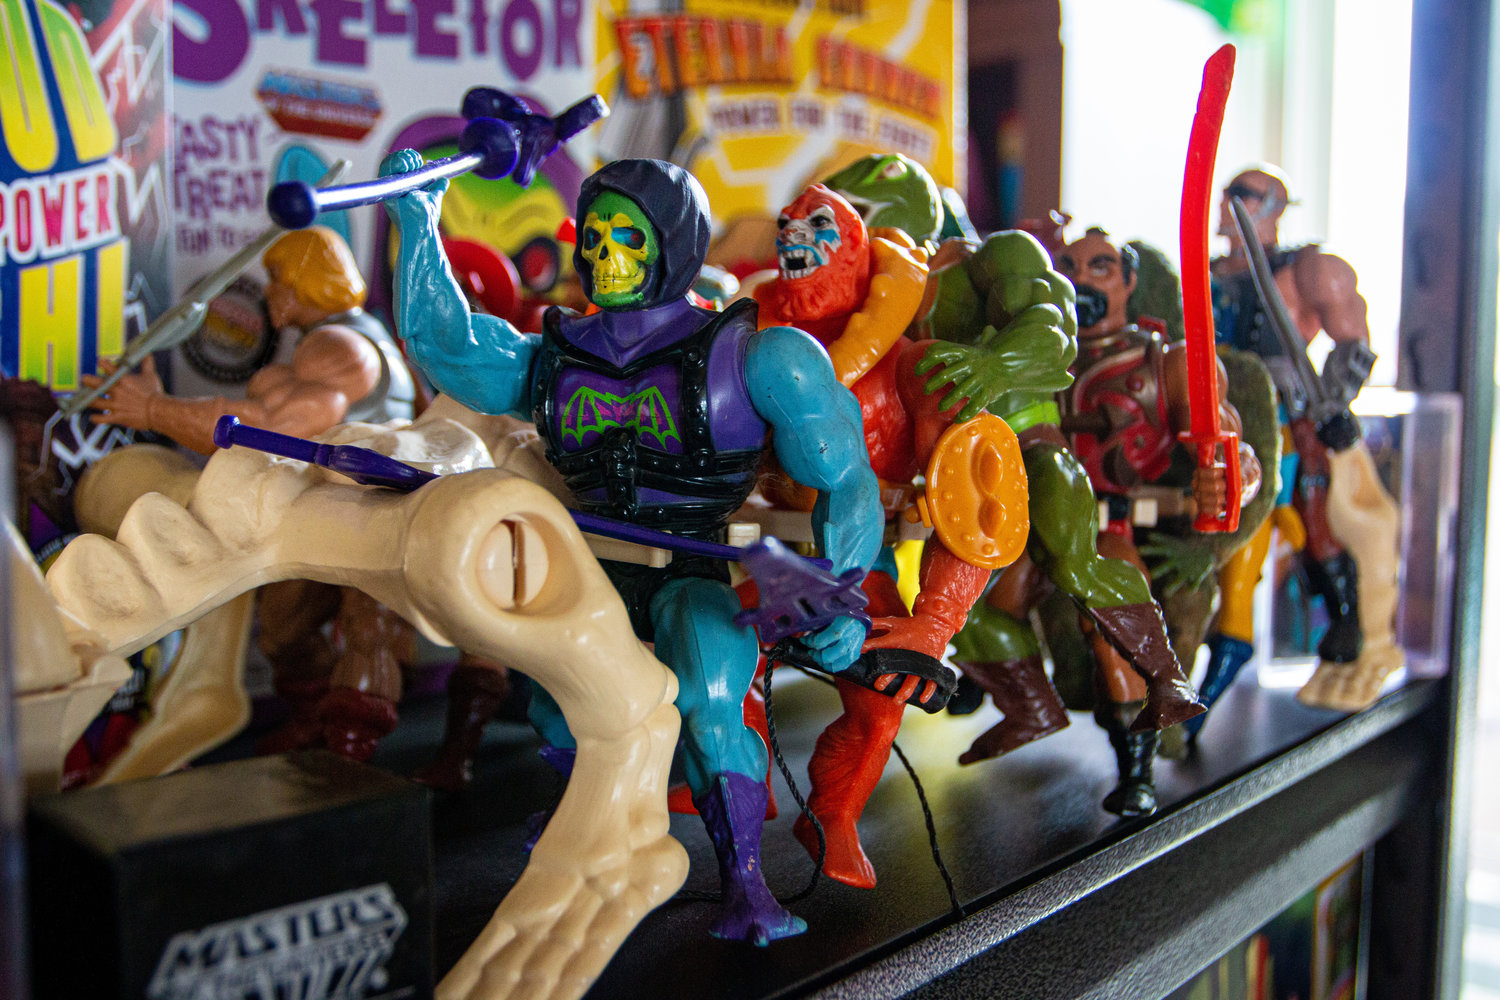 "Masters of the Universe" characters riding on a skeleton.